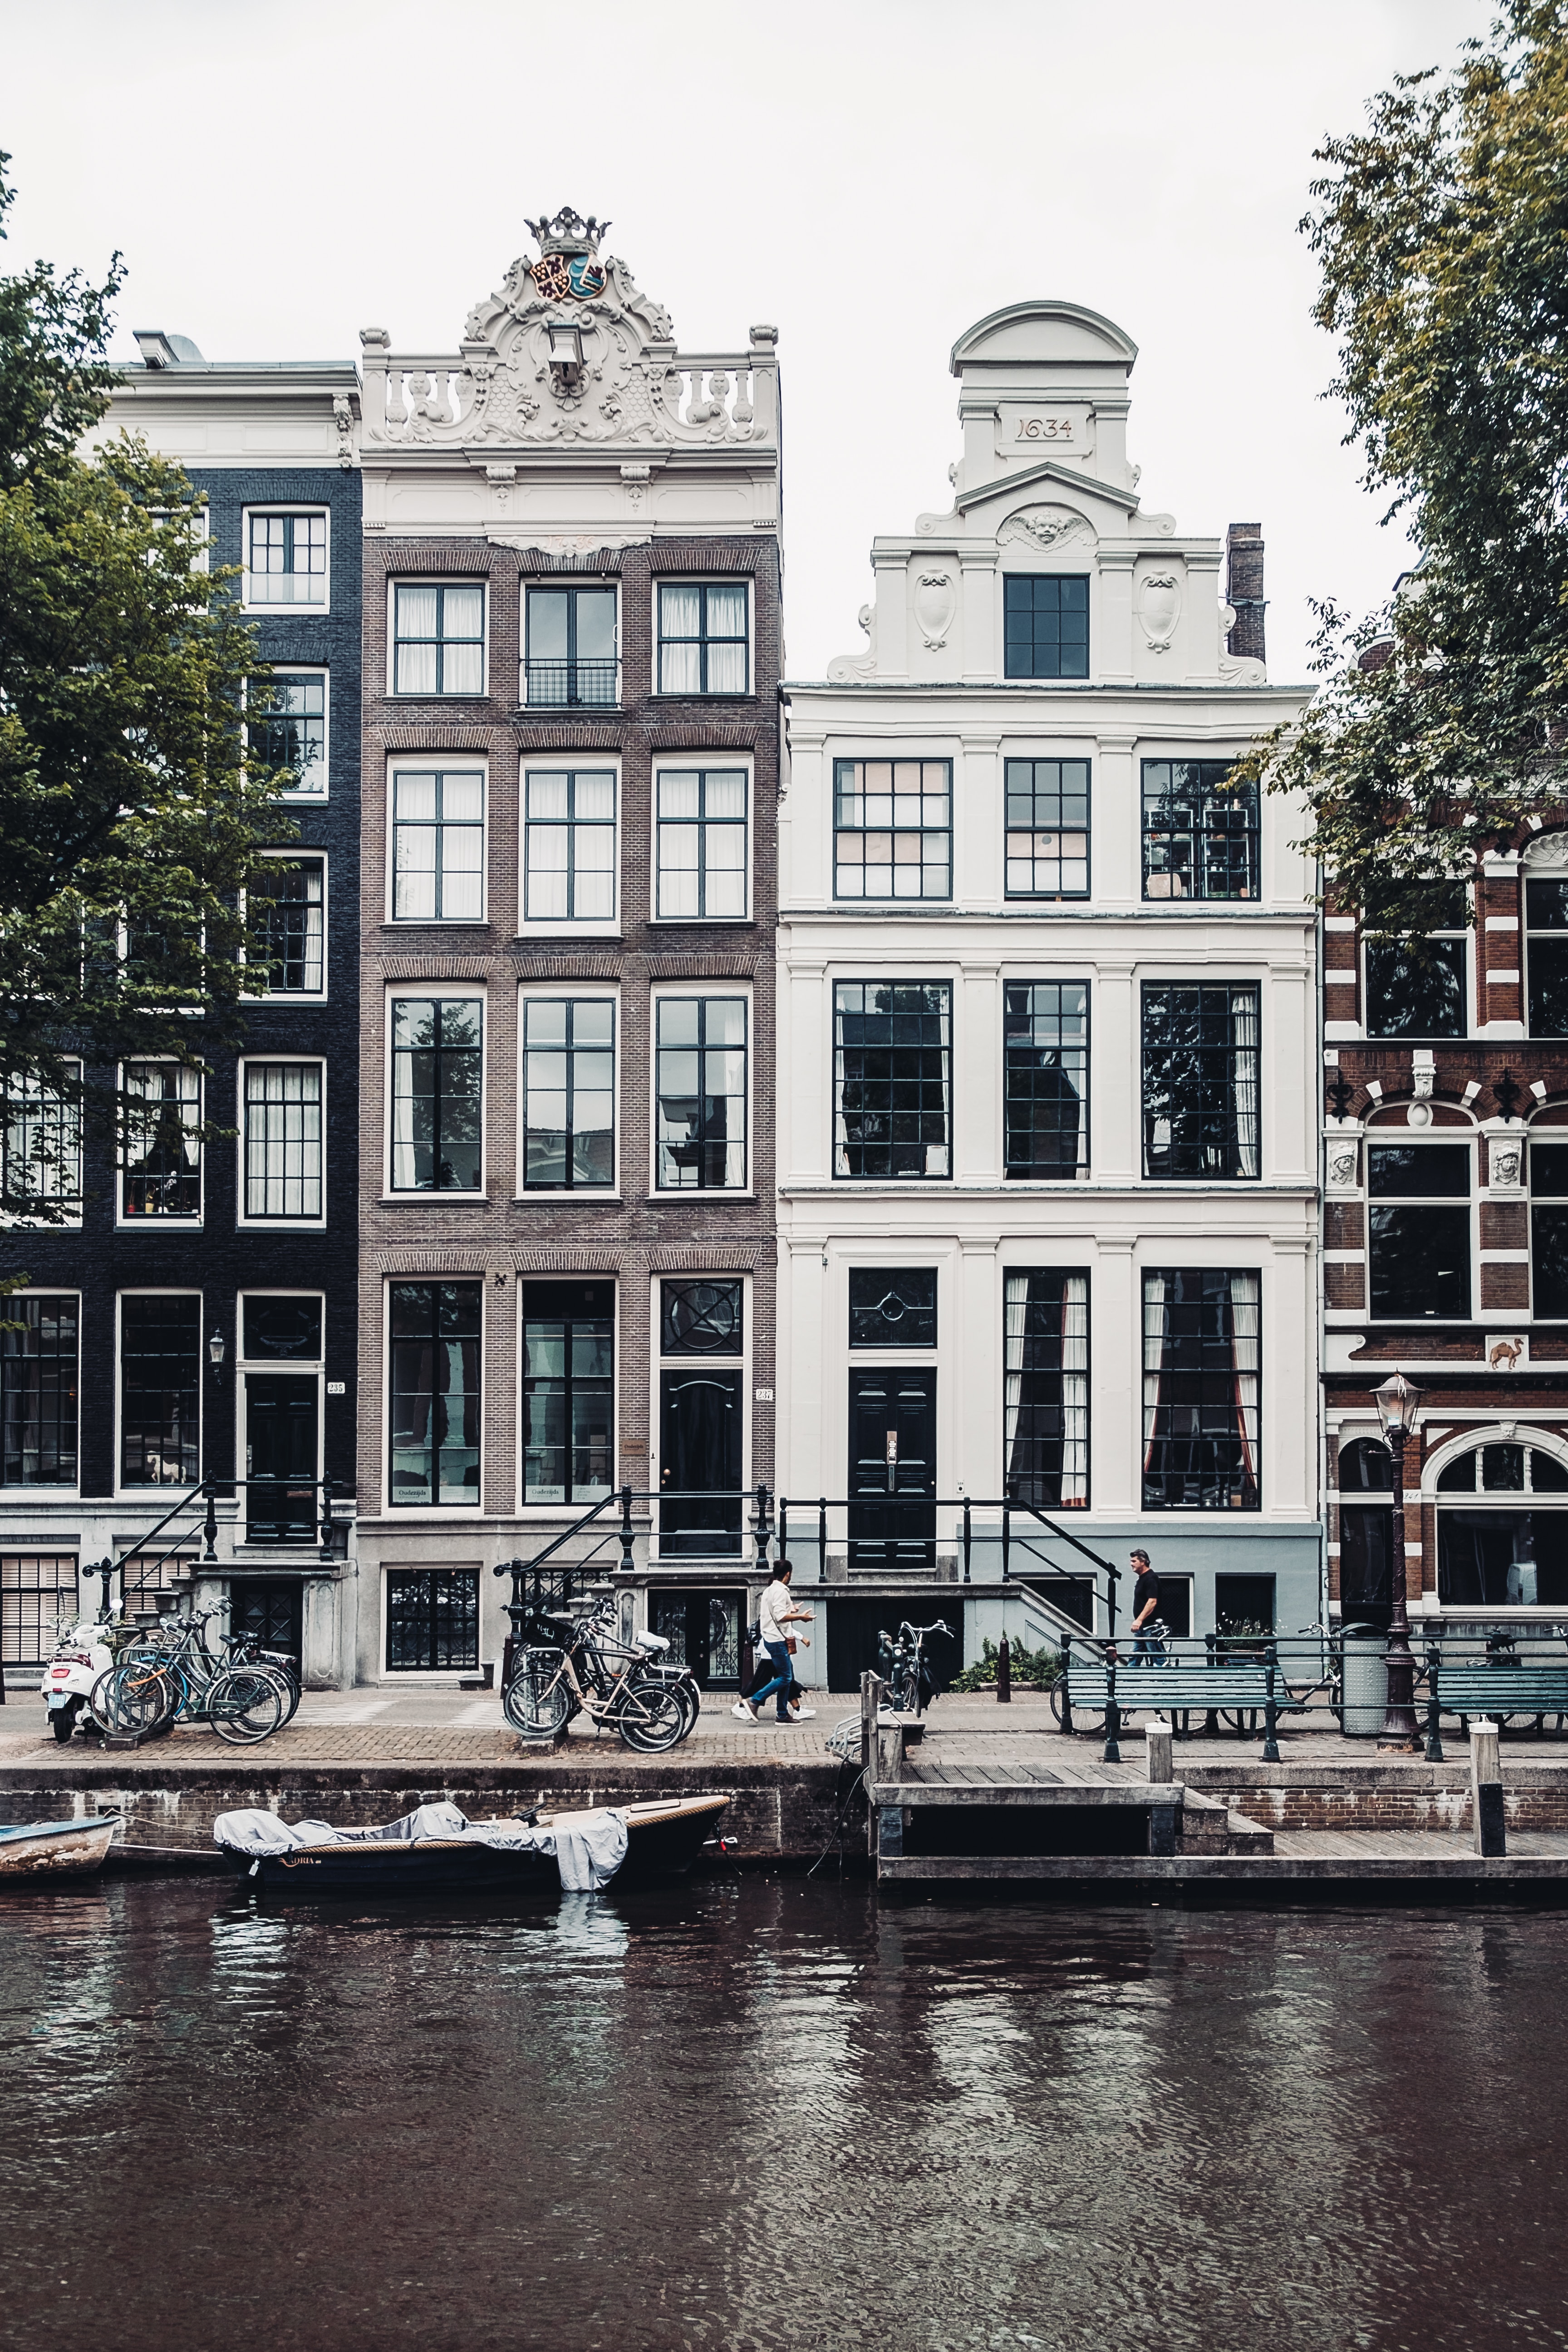 Amsterdam, The Nederlands, Houses along a canal (credit: Photo by Robin Benzrihem on Unsplash)